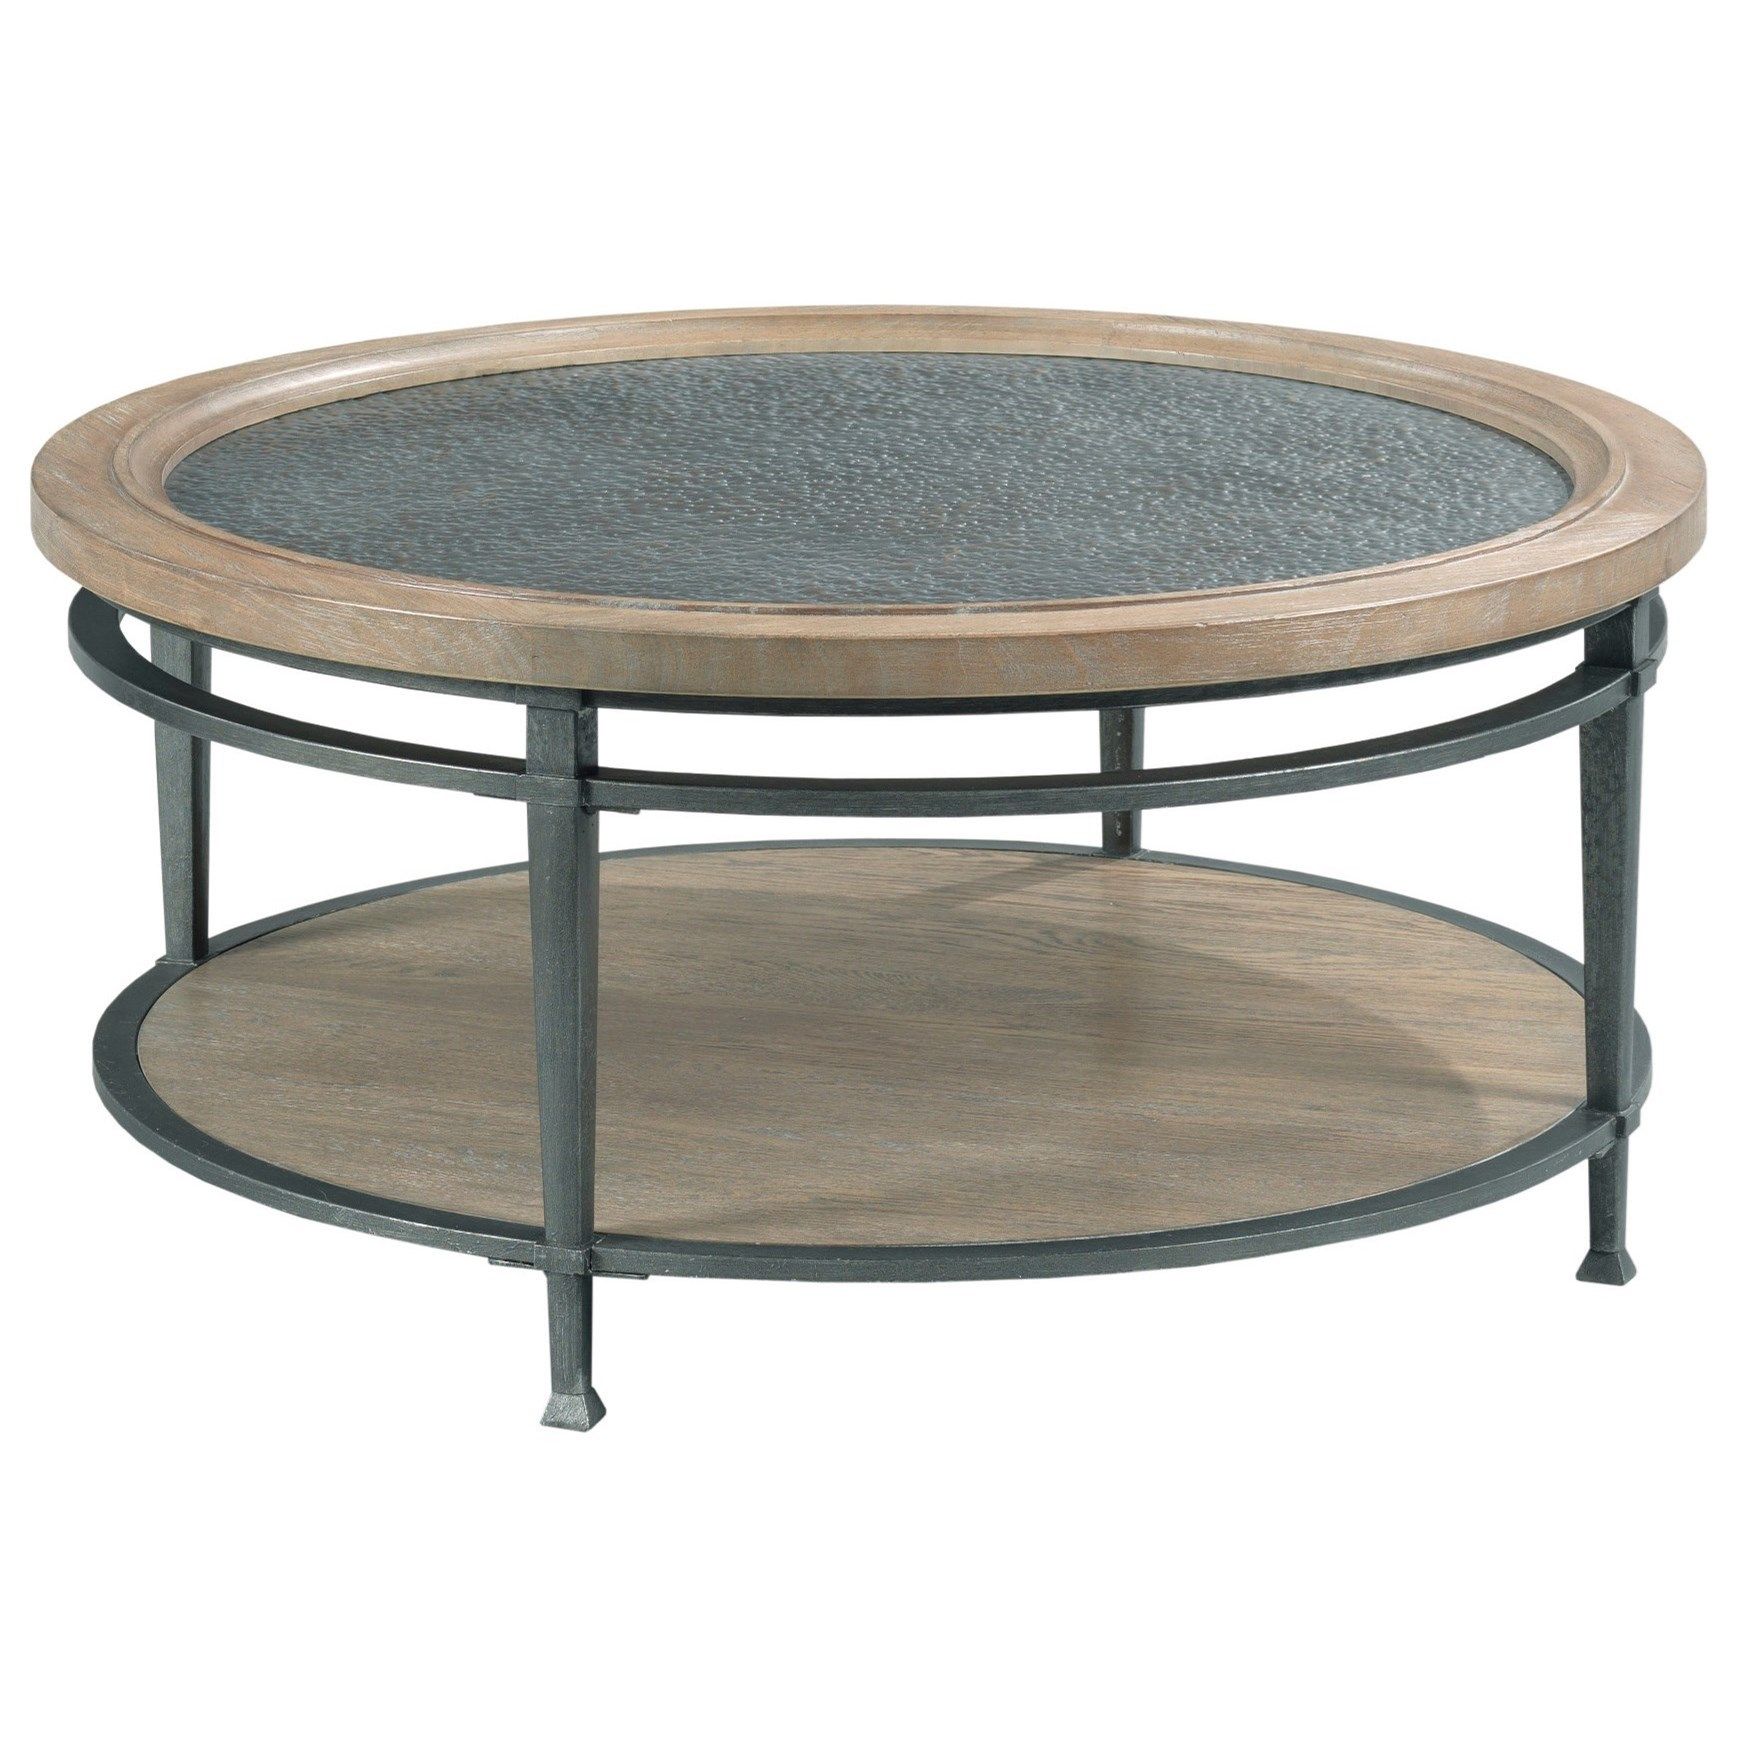 Hammary Austin Transitional Round Coffee Table | Wilson's Furniture With Regard To Monaco Round Coffee Tables (View 9 of 20)